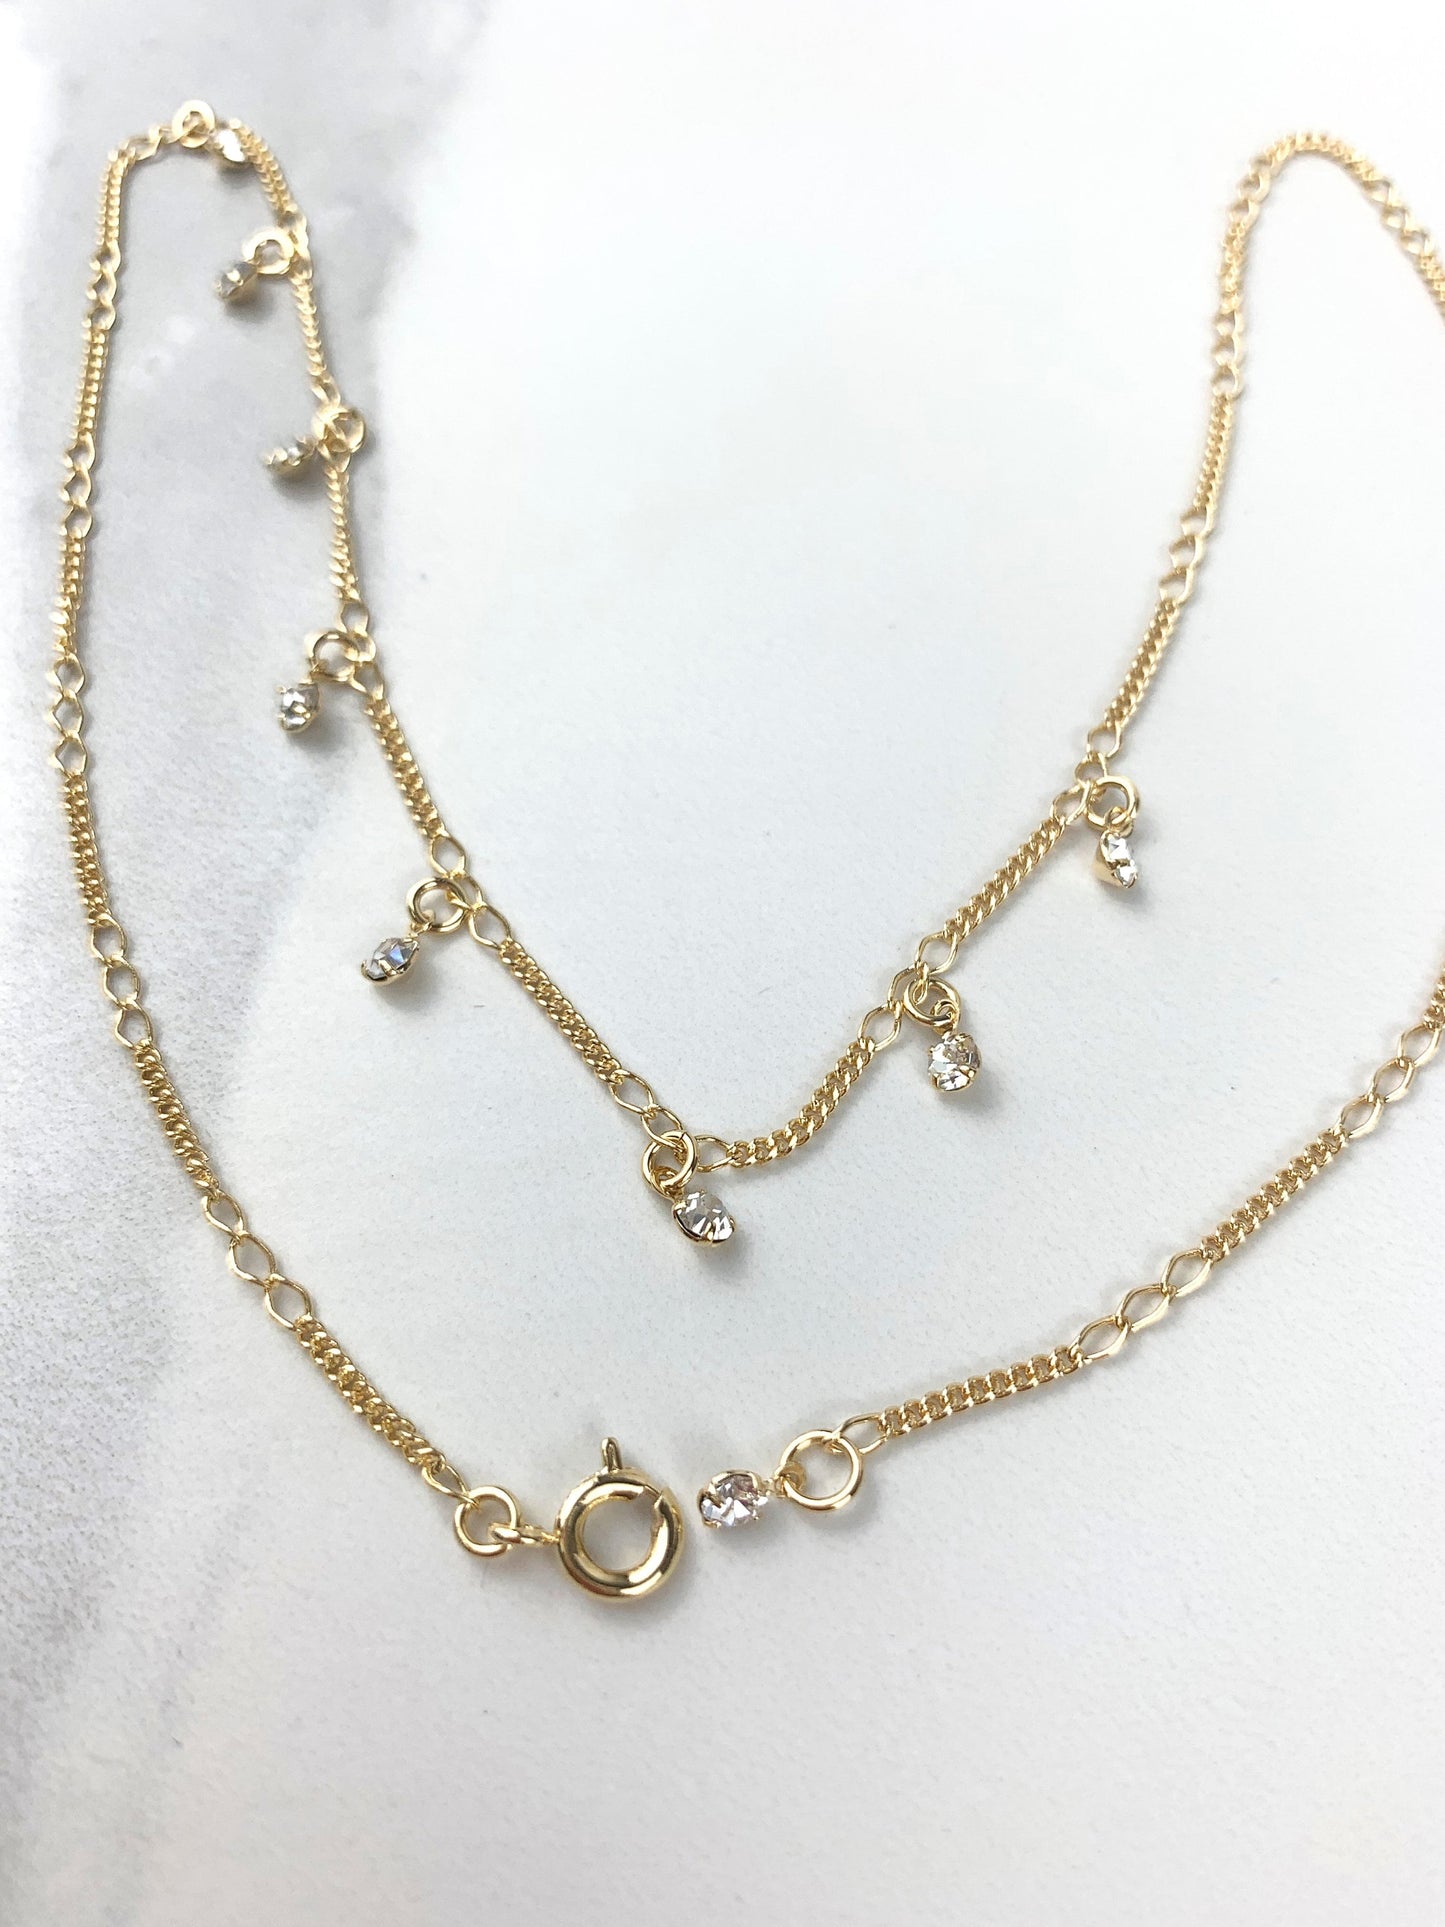 18k Gold Filled Cubic Zirconia  Fancy Crystal Necklace 16 inches more extension Choker Wholesale Jewelry Supplies